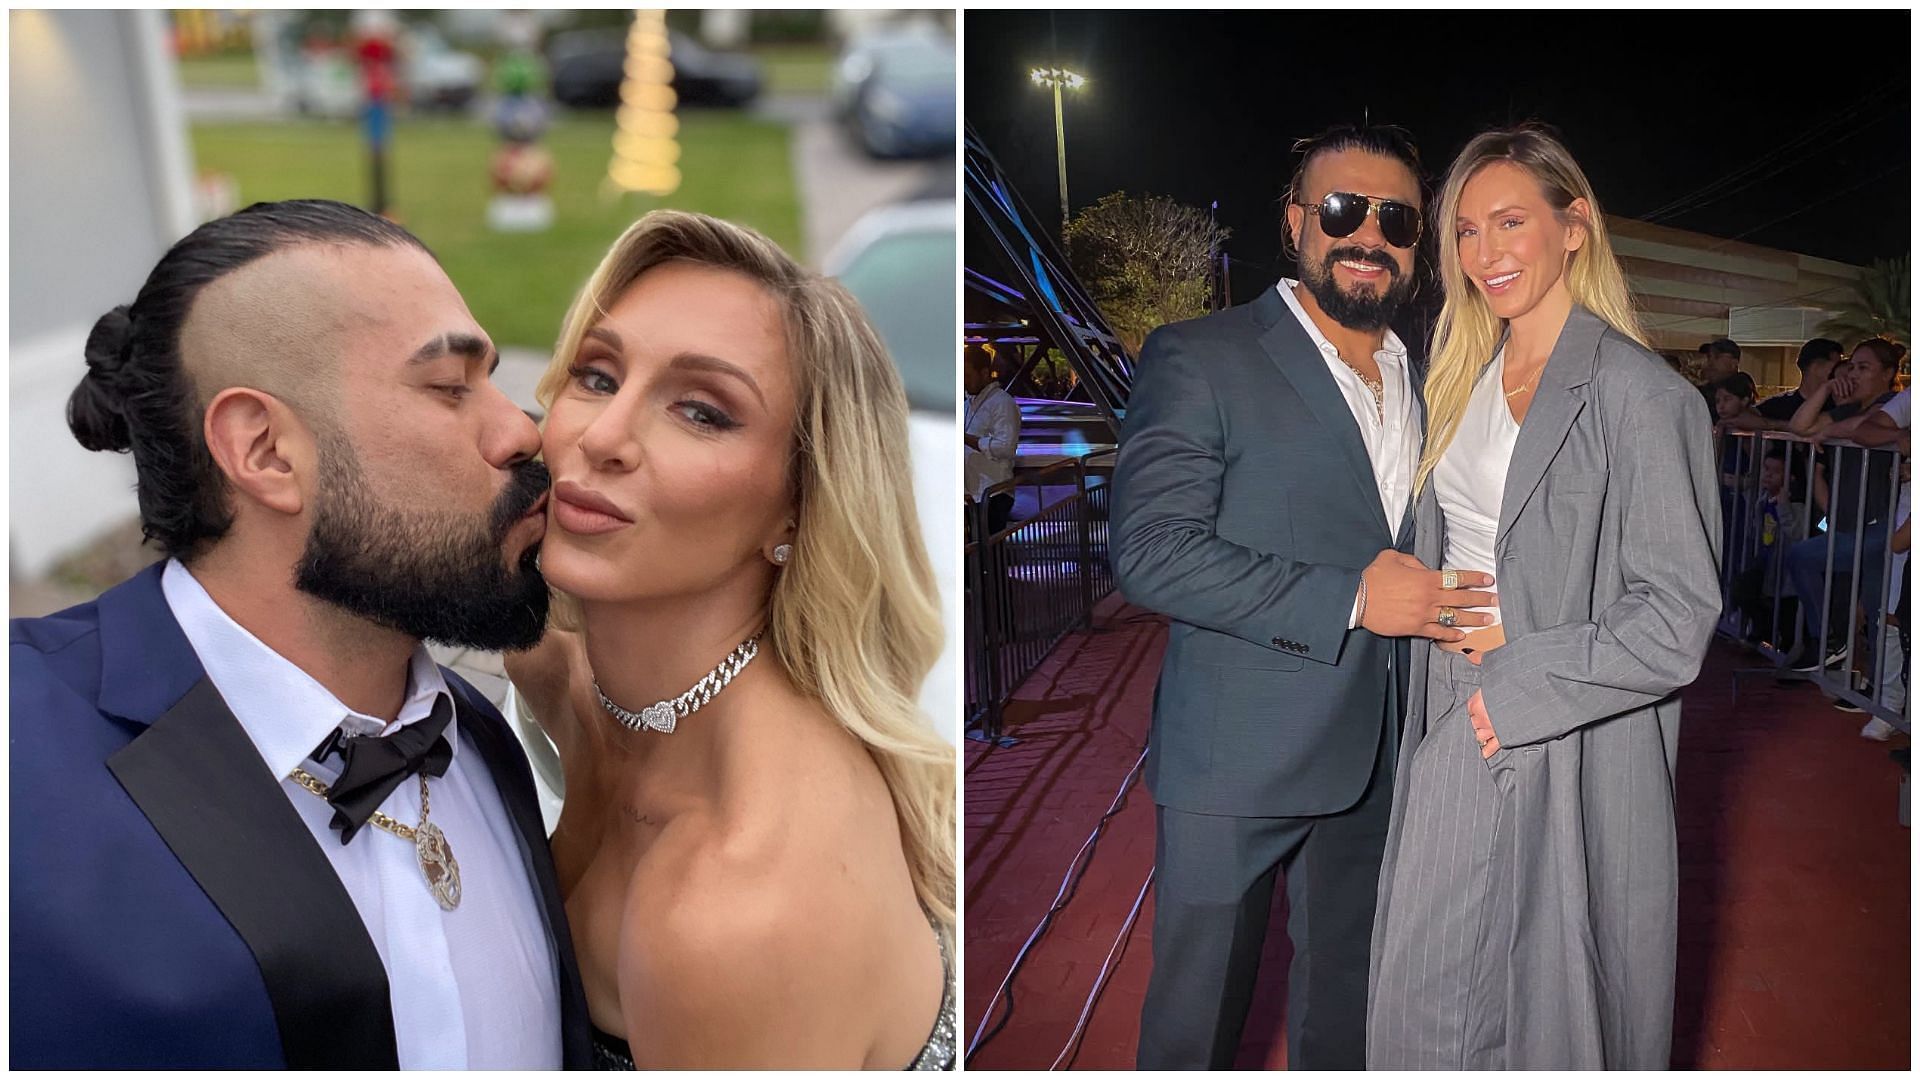 Andrade is a RAW Superstar and Charlotte Flair is a SmackDown Superstar in WWE.